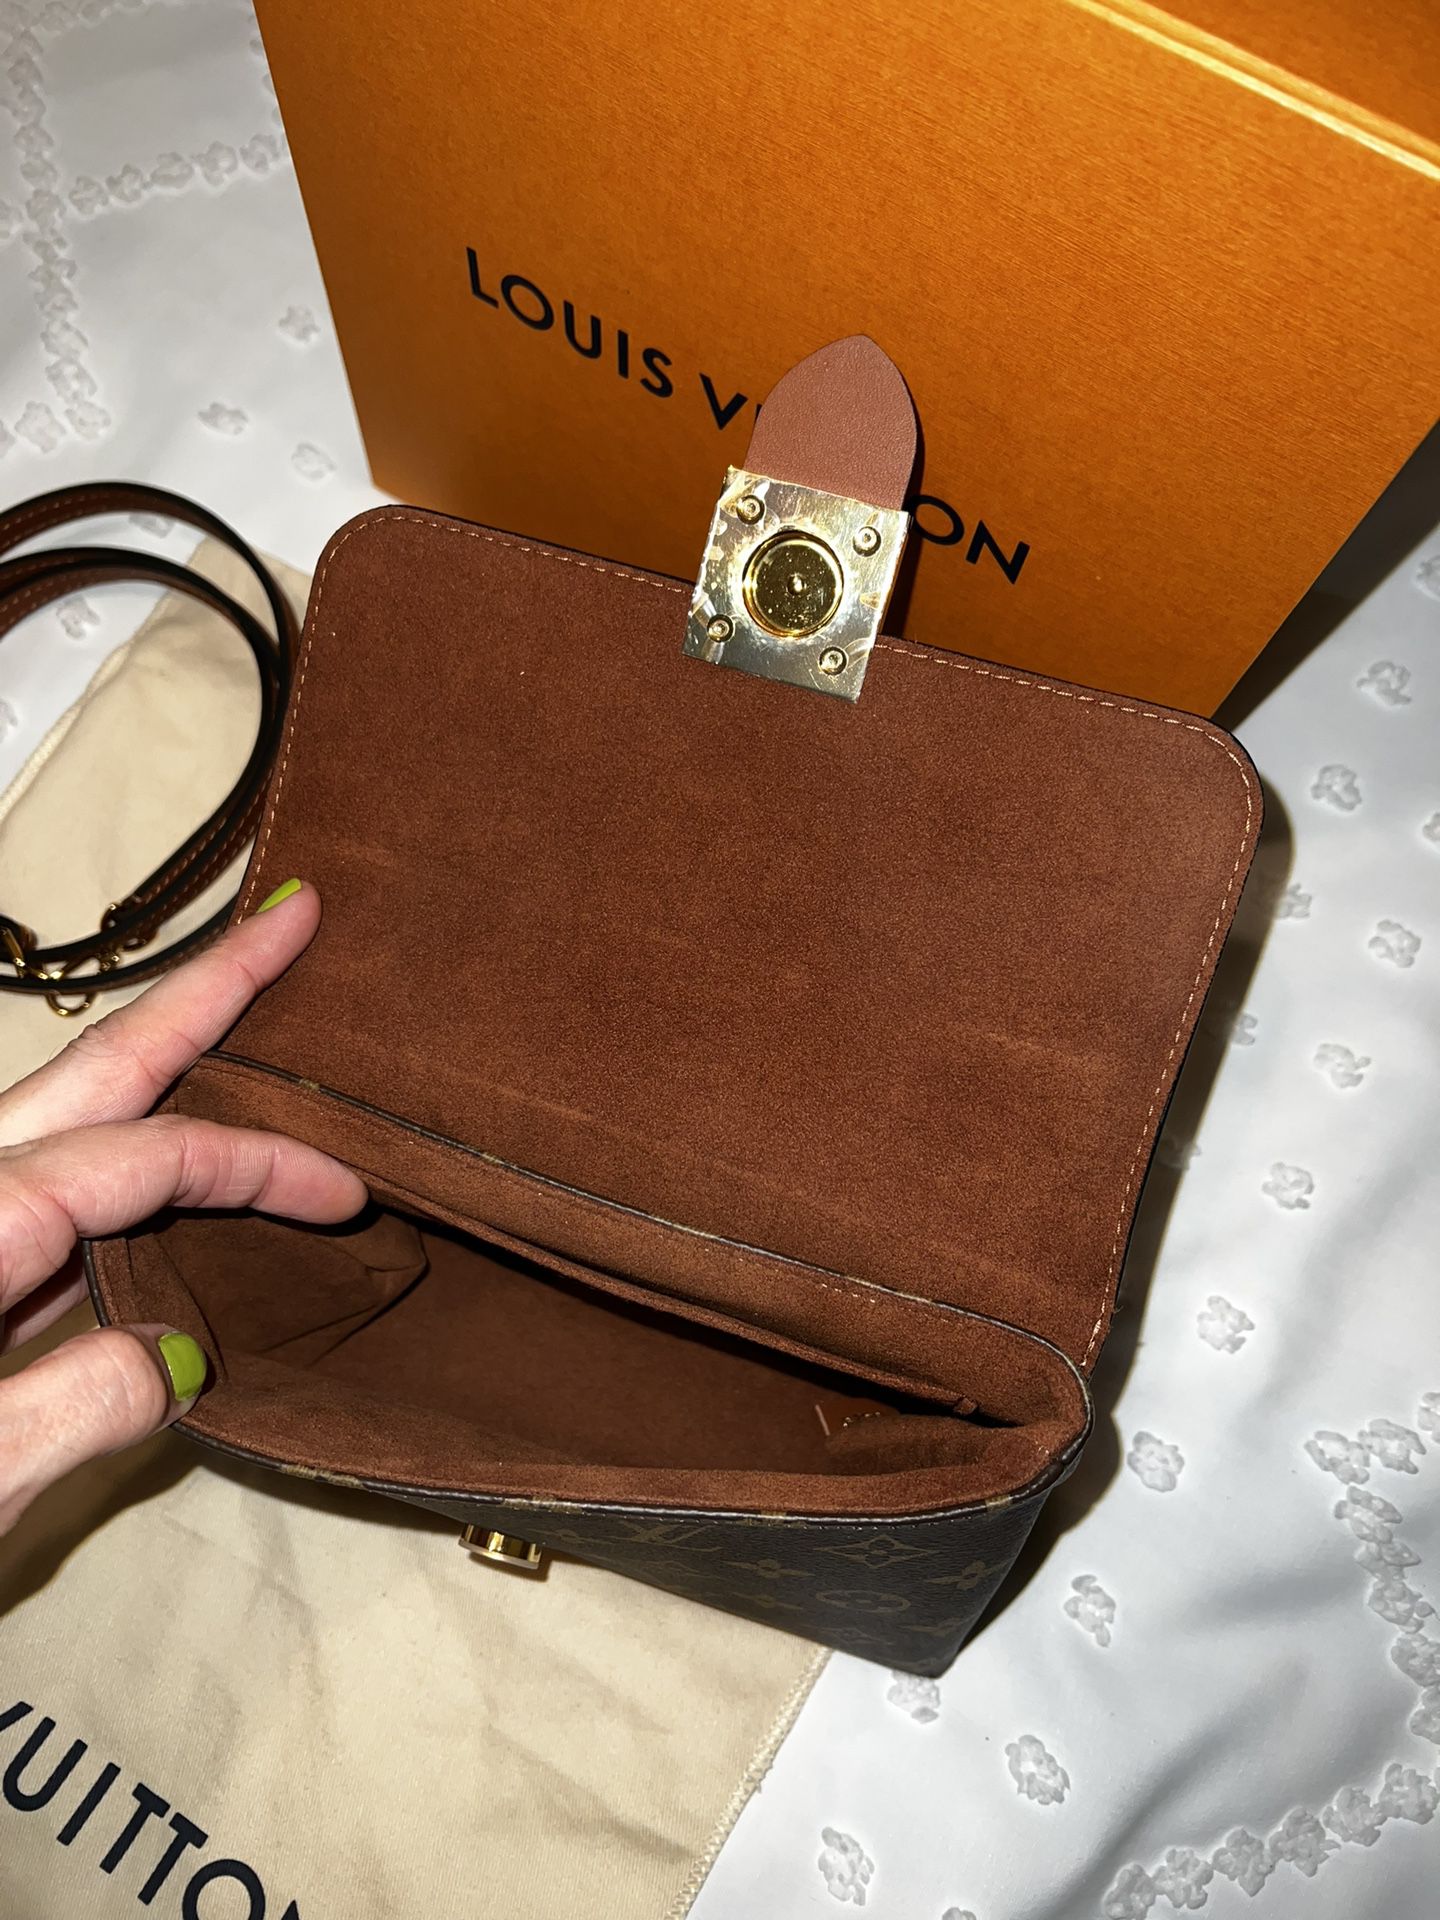 Adorable Authentic Louis Vuitton Alma BB-NO STRAP! Comes With Lock And Key!!  for Sale in Prosper, TX - OfferUp